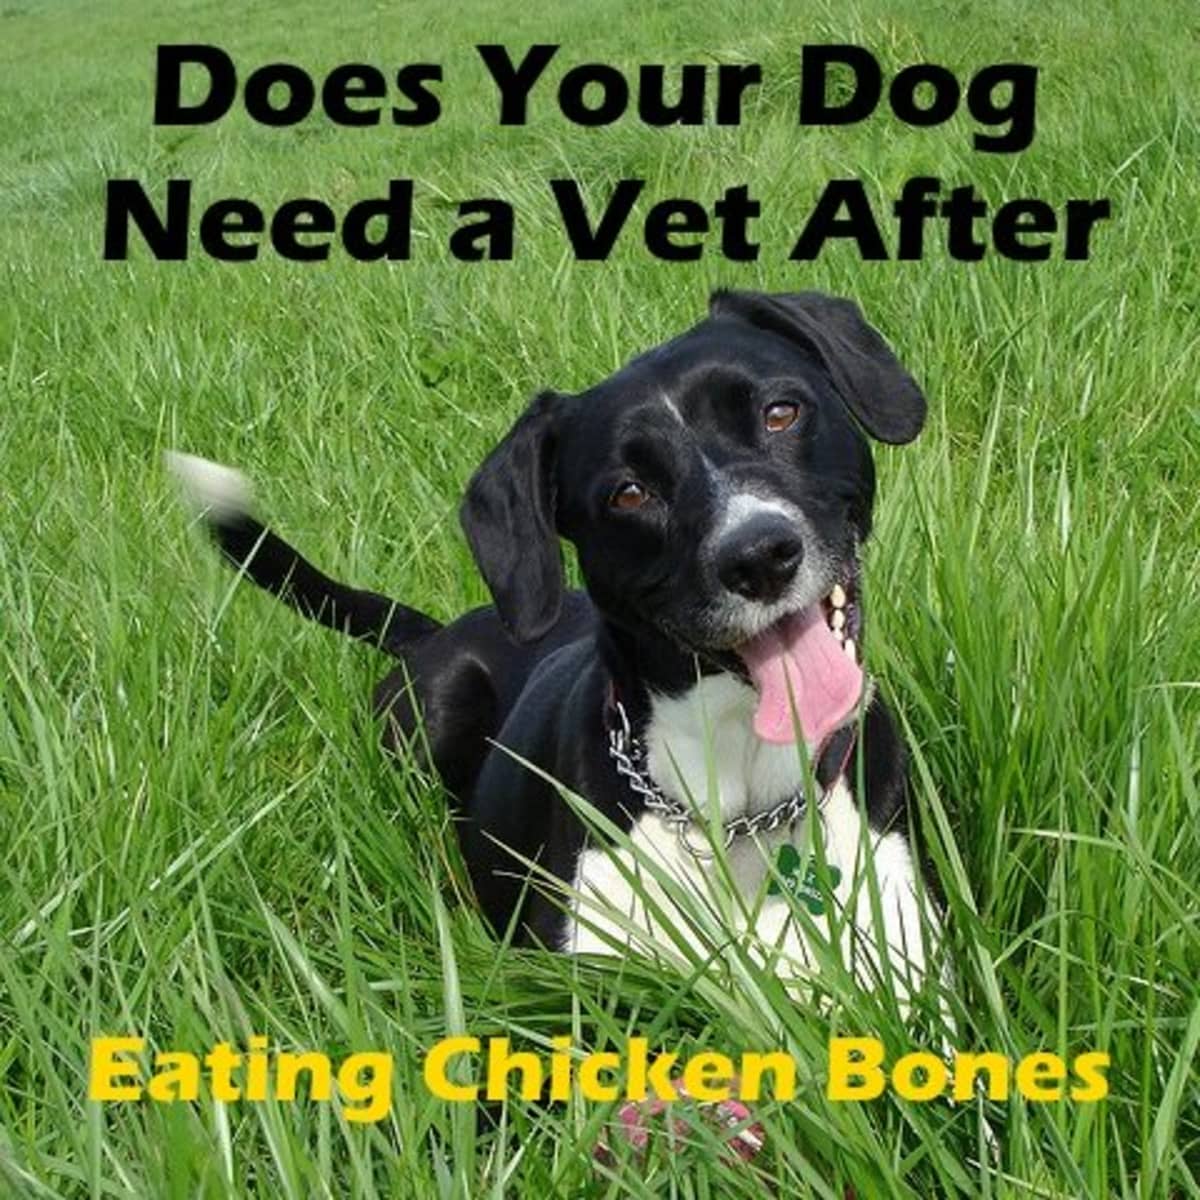 what happens if a dog eats a chicken wing bone